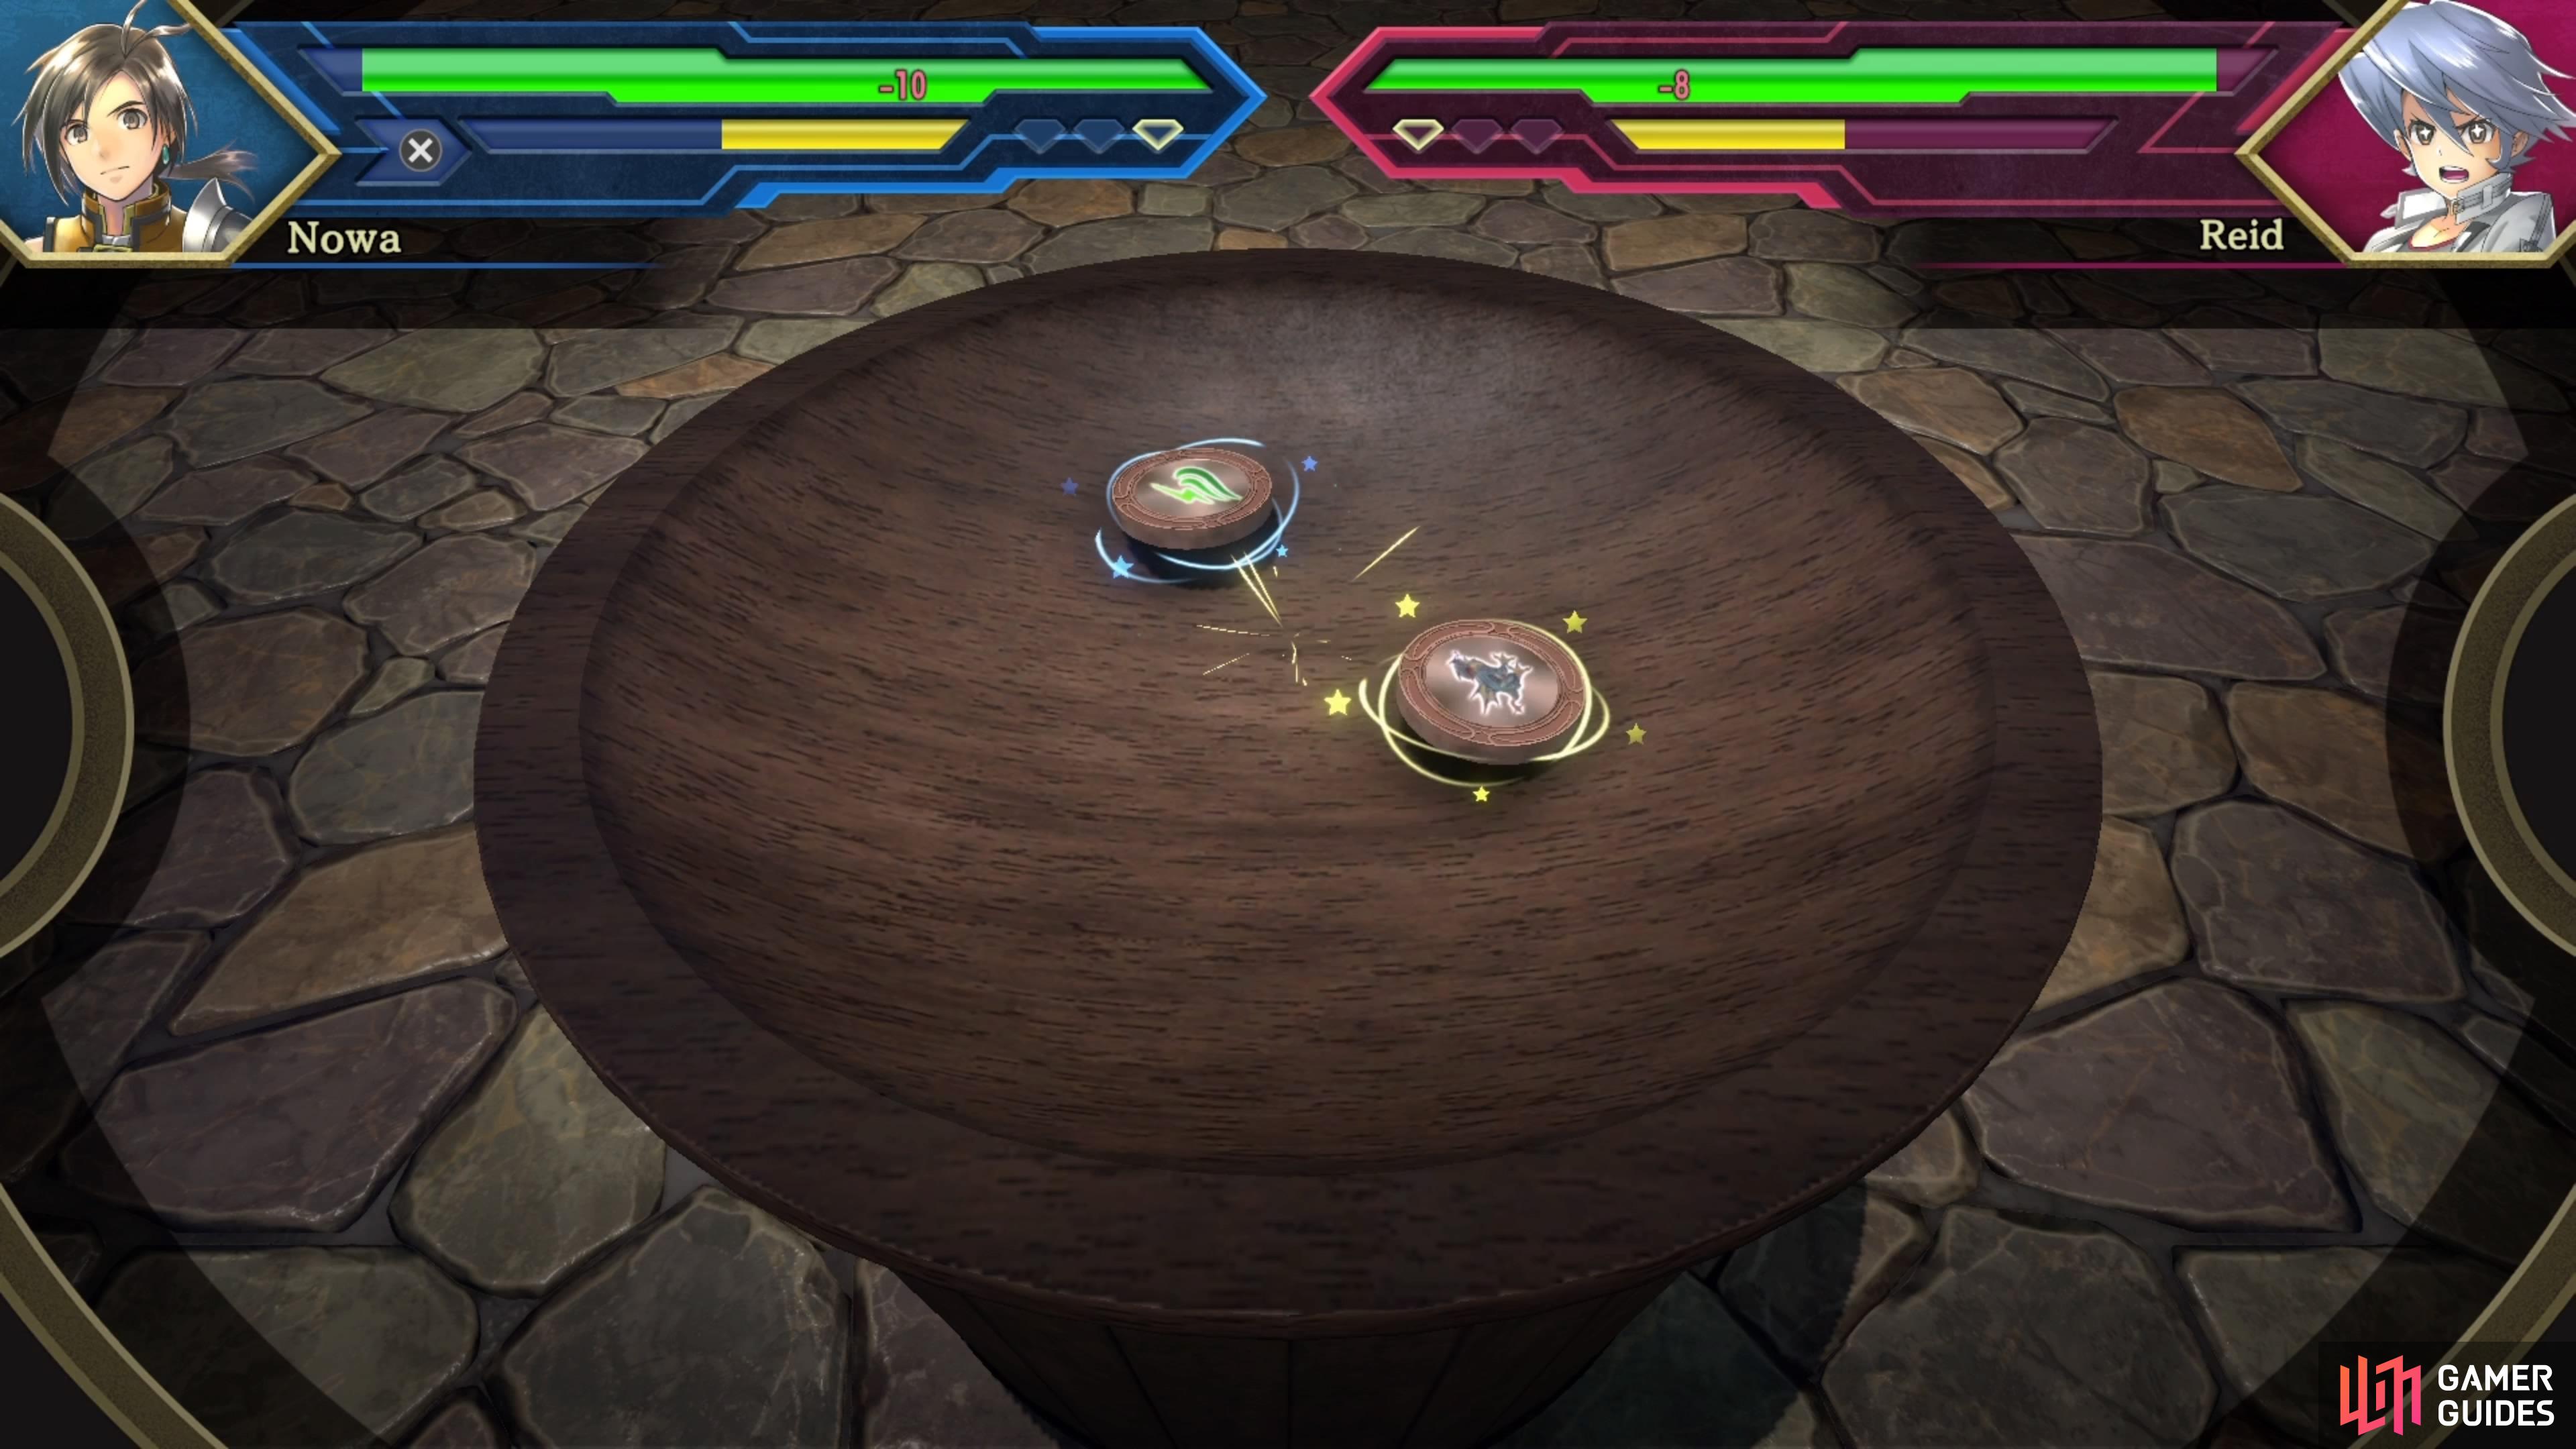 Beigoma is a minigame that is similar to Beyblade.